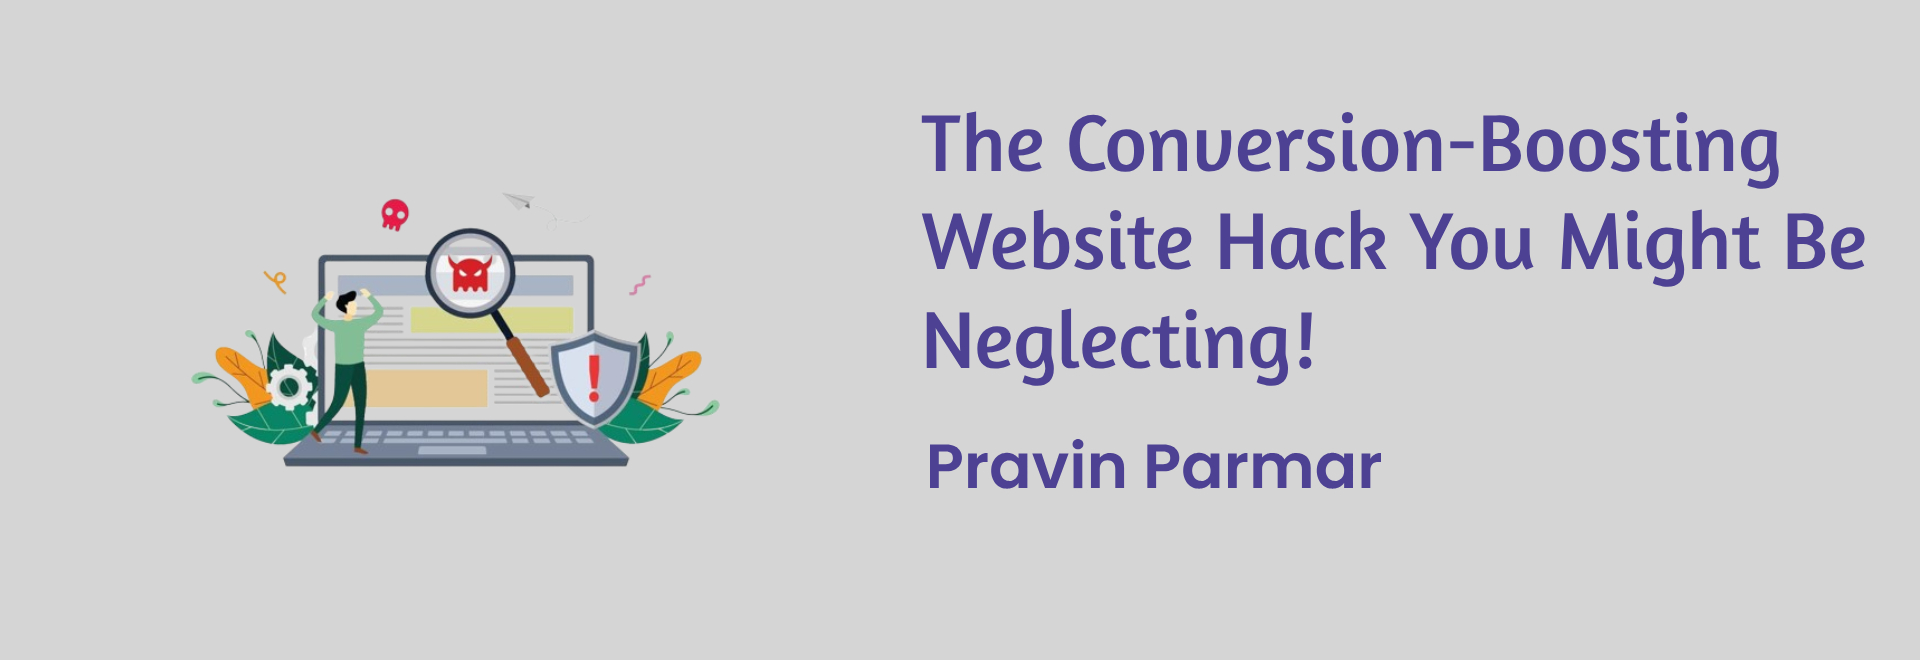 Conversion-Boosting Website Hack You Might Be Neglecting! How does that sound?